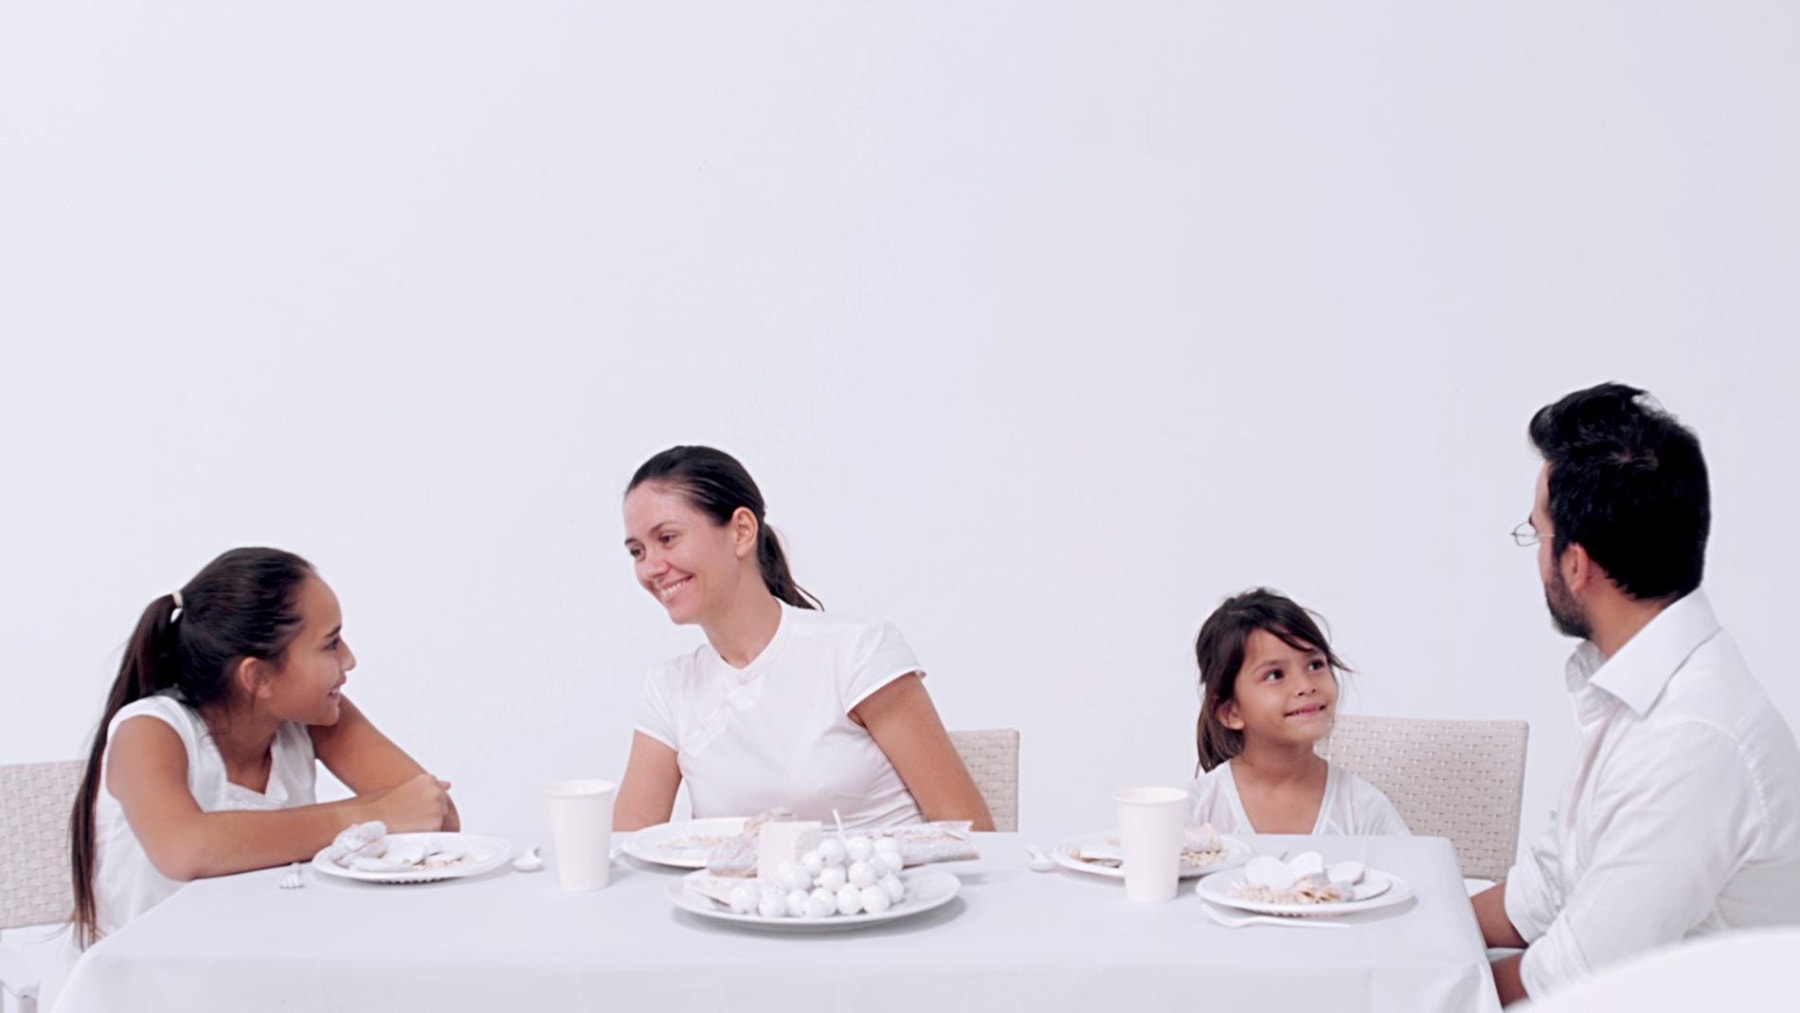 Family dressed in white in an all white room sitting around a white table with white food